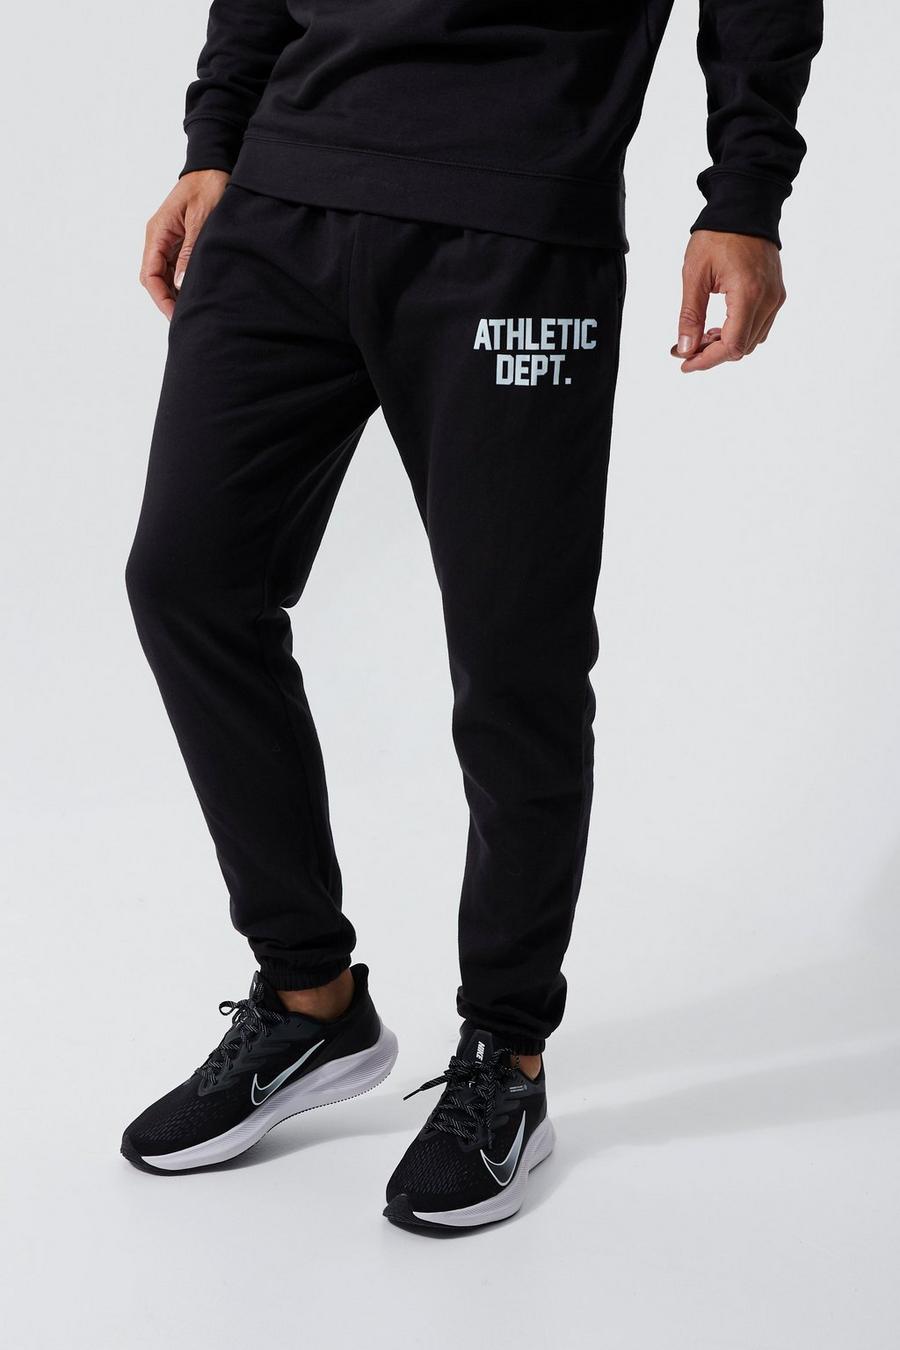 Black Tall Man Active Athletic Dept. Joggers